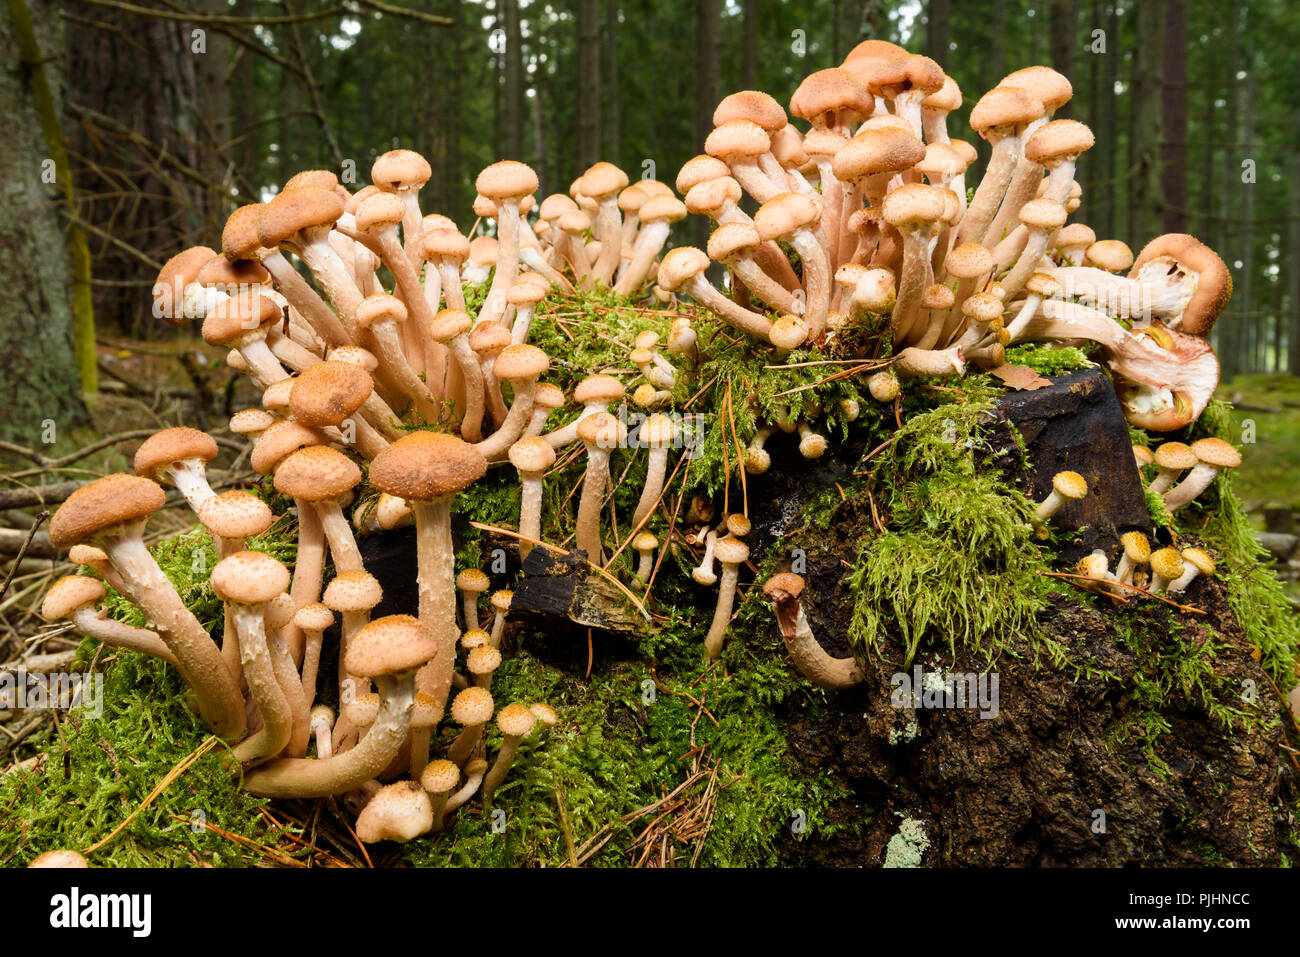 Young specimens of honey fungus (Armillaria mellea) growing in a cluster on a tree stump in a forest. Stock Photo